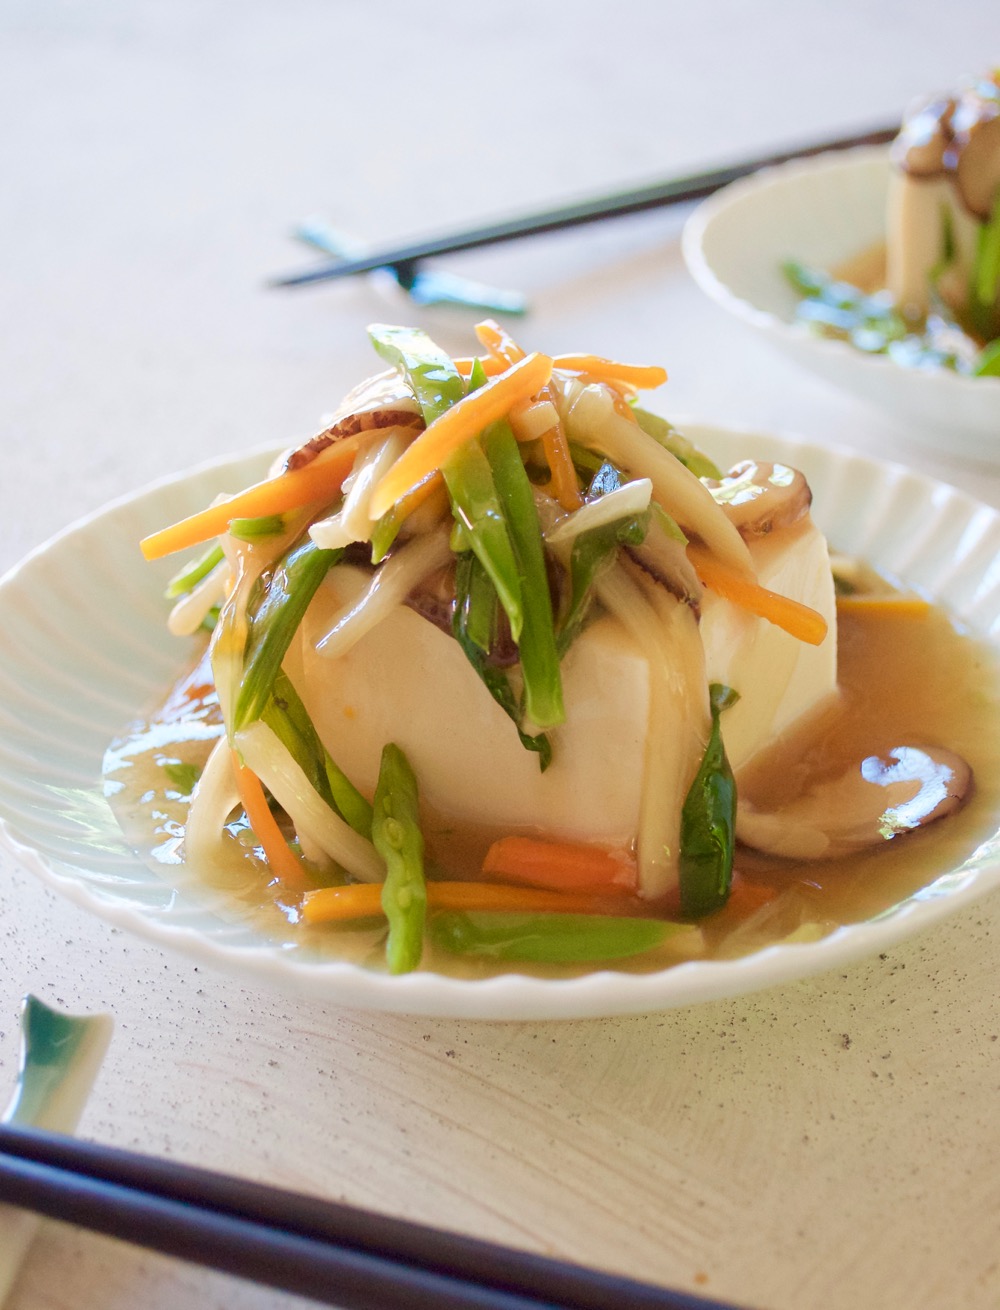 Tofu with plenty of vegetable in thick sauce. It makes the otherwise a simple tofu so special and pretty.